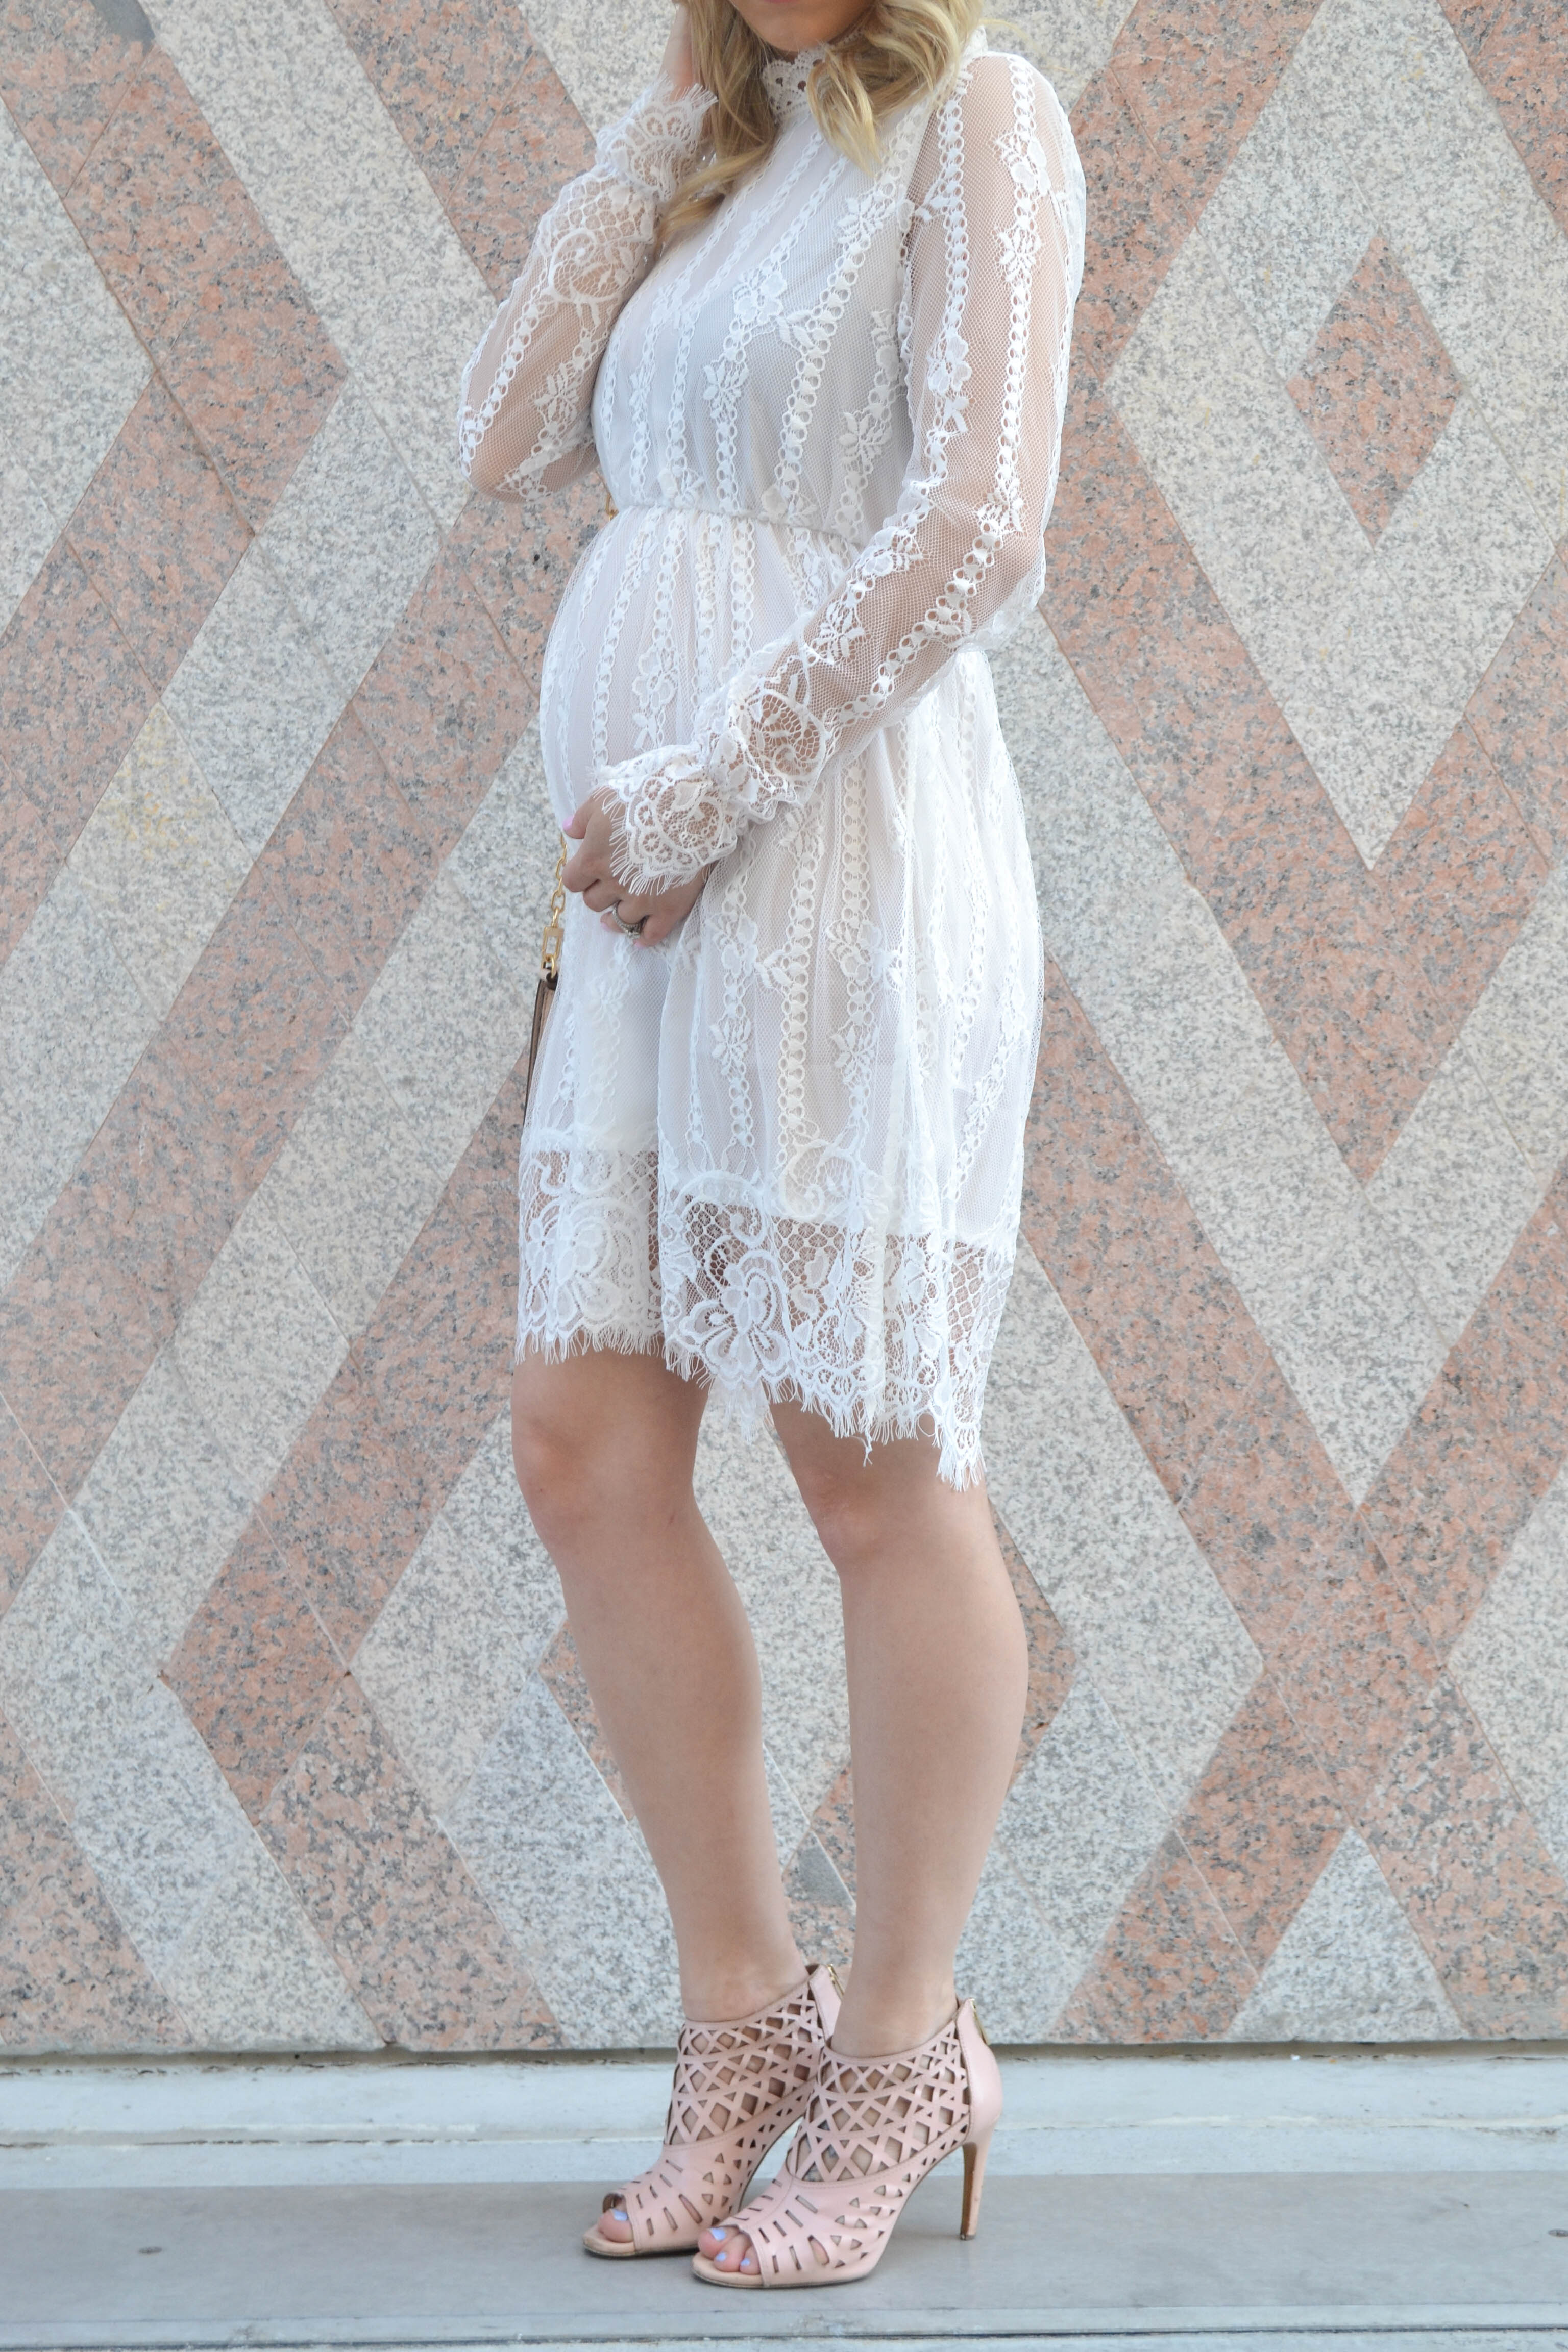 baby bump, pregnancy style, maternity style, white lace dress, perfect baby shower dress